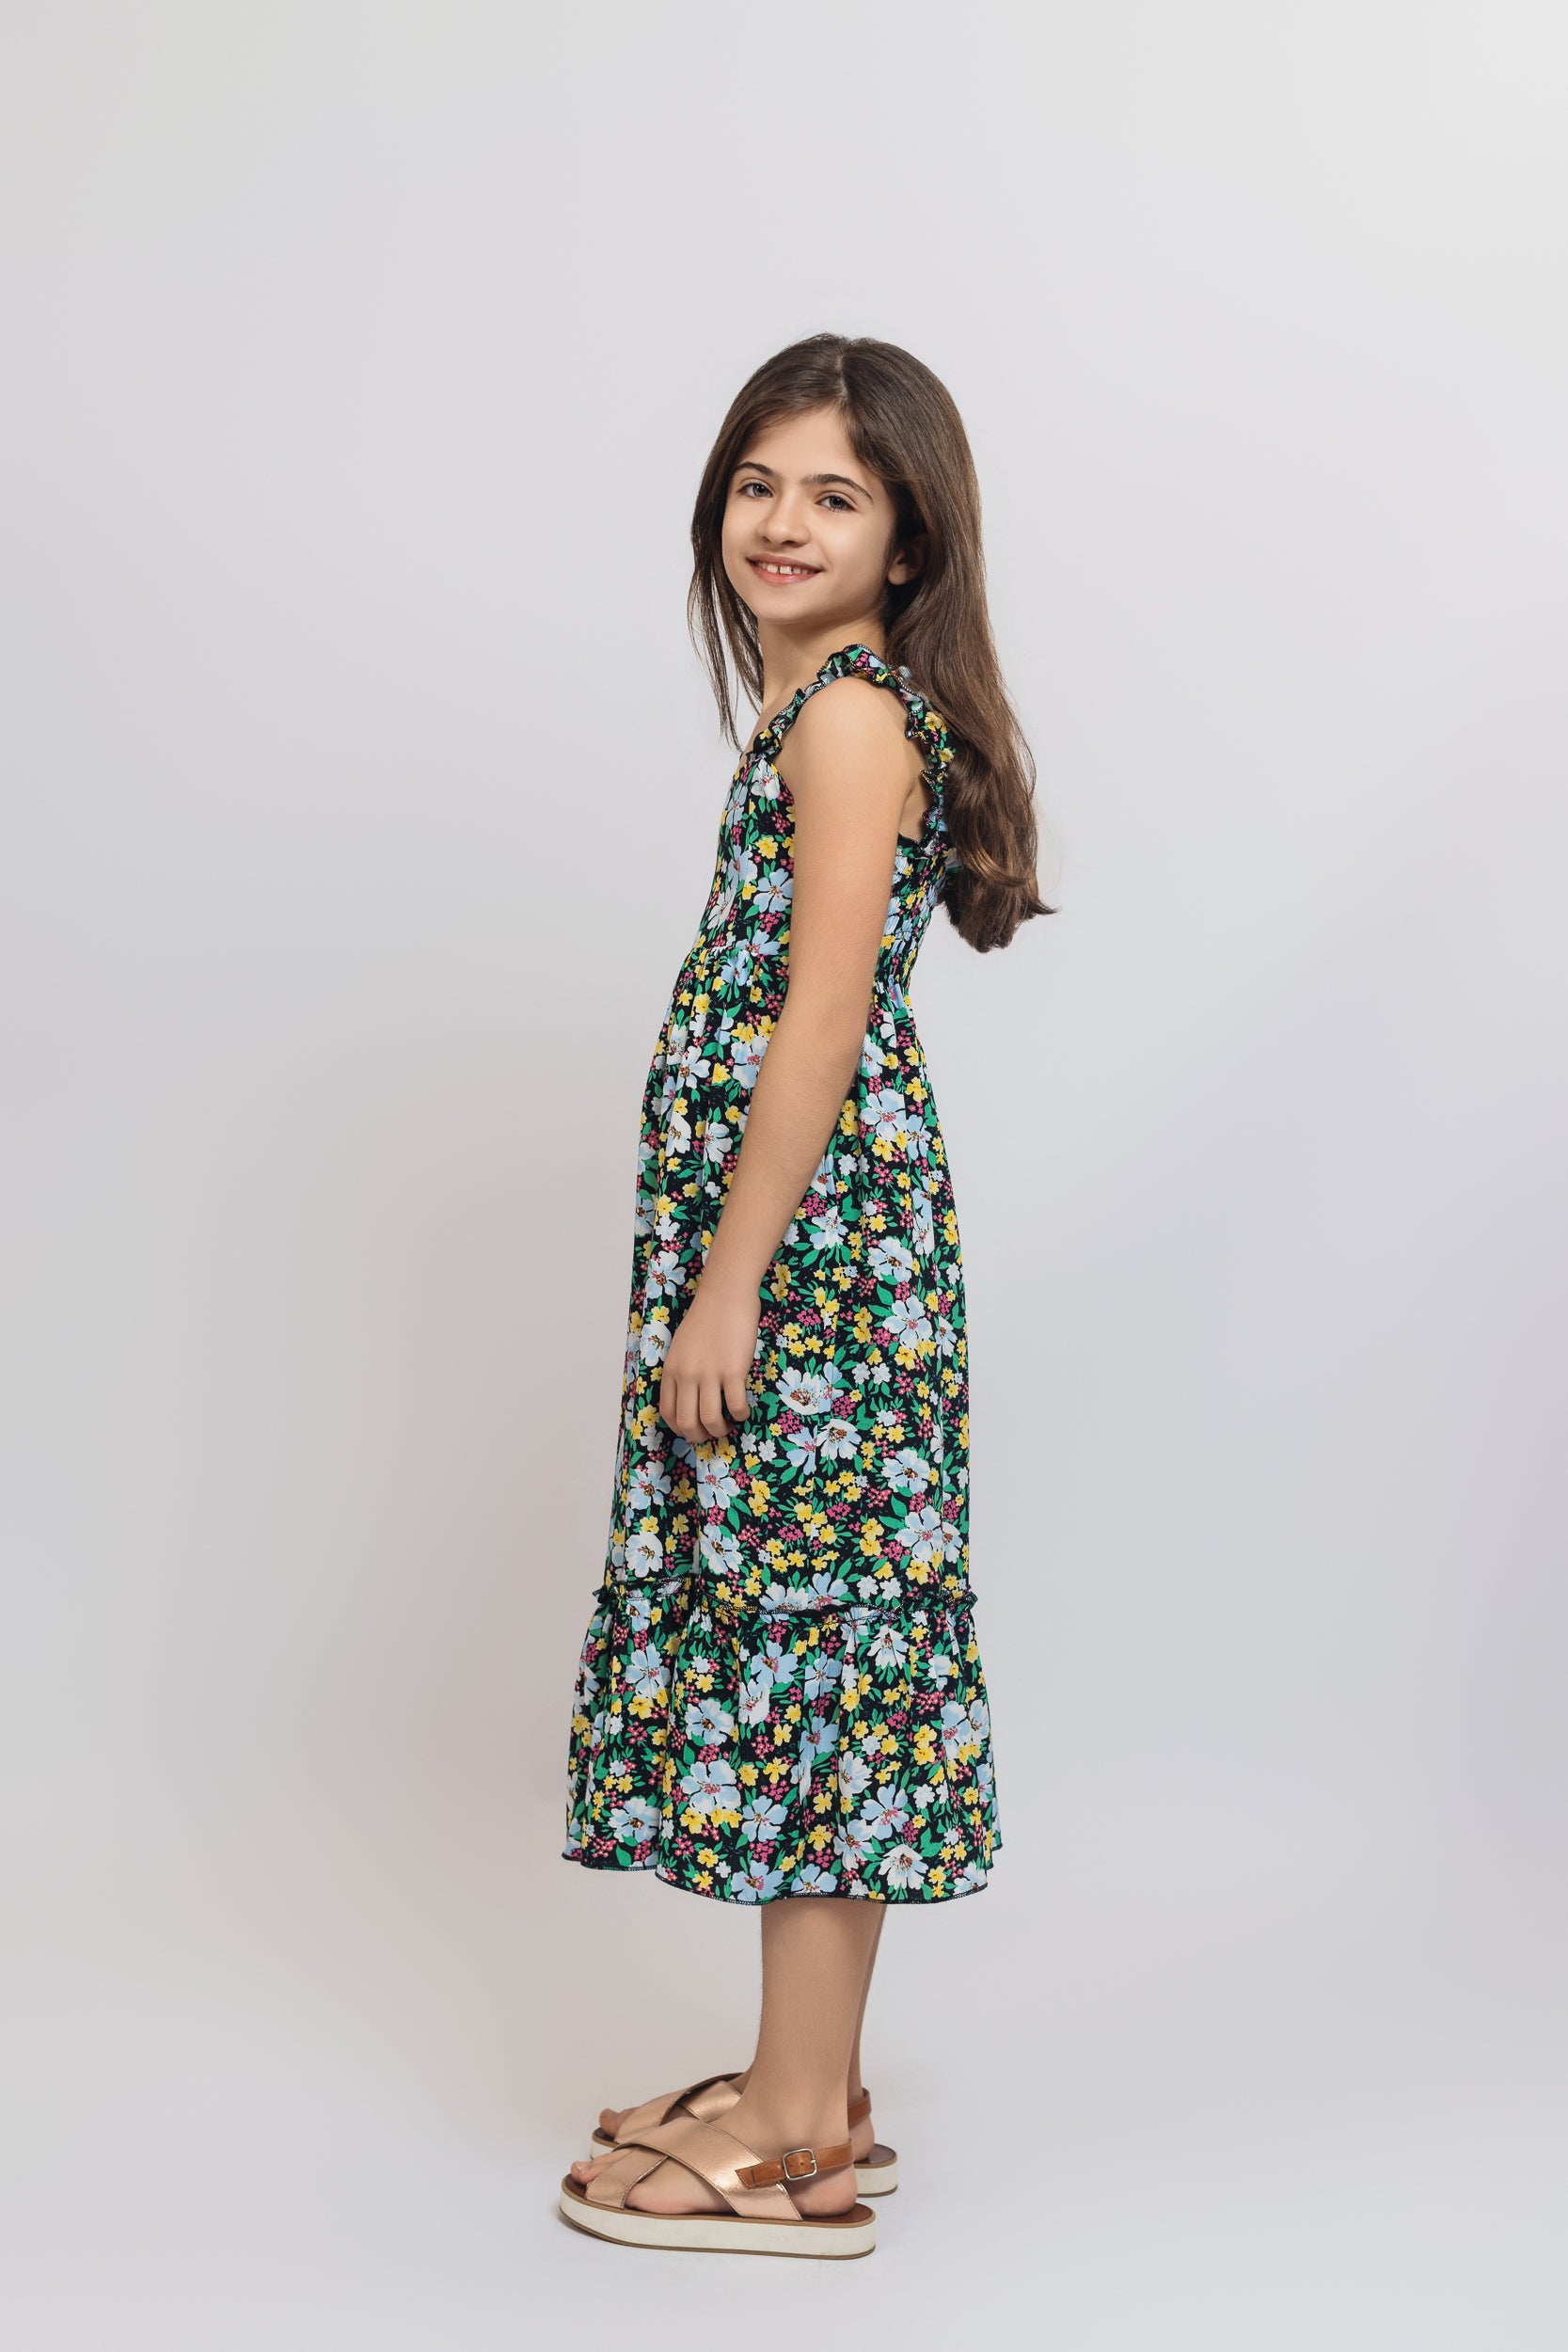 Floral Ruffled Dress For Girls